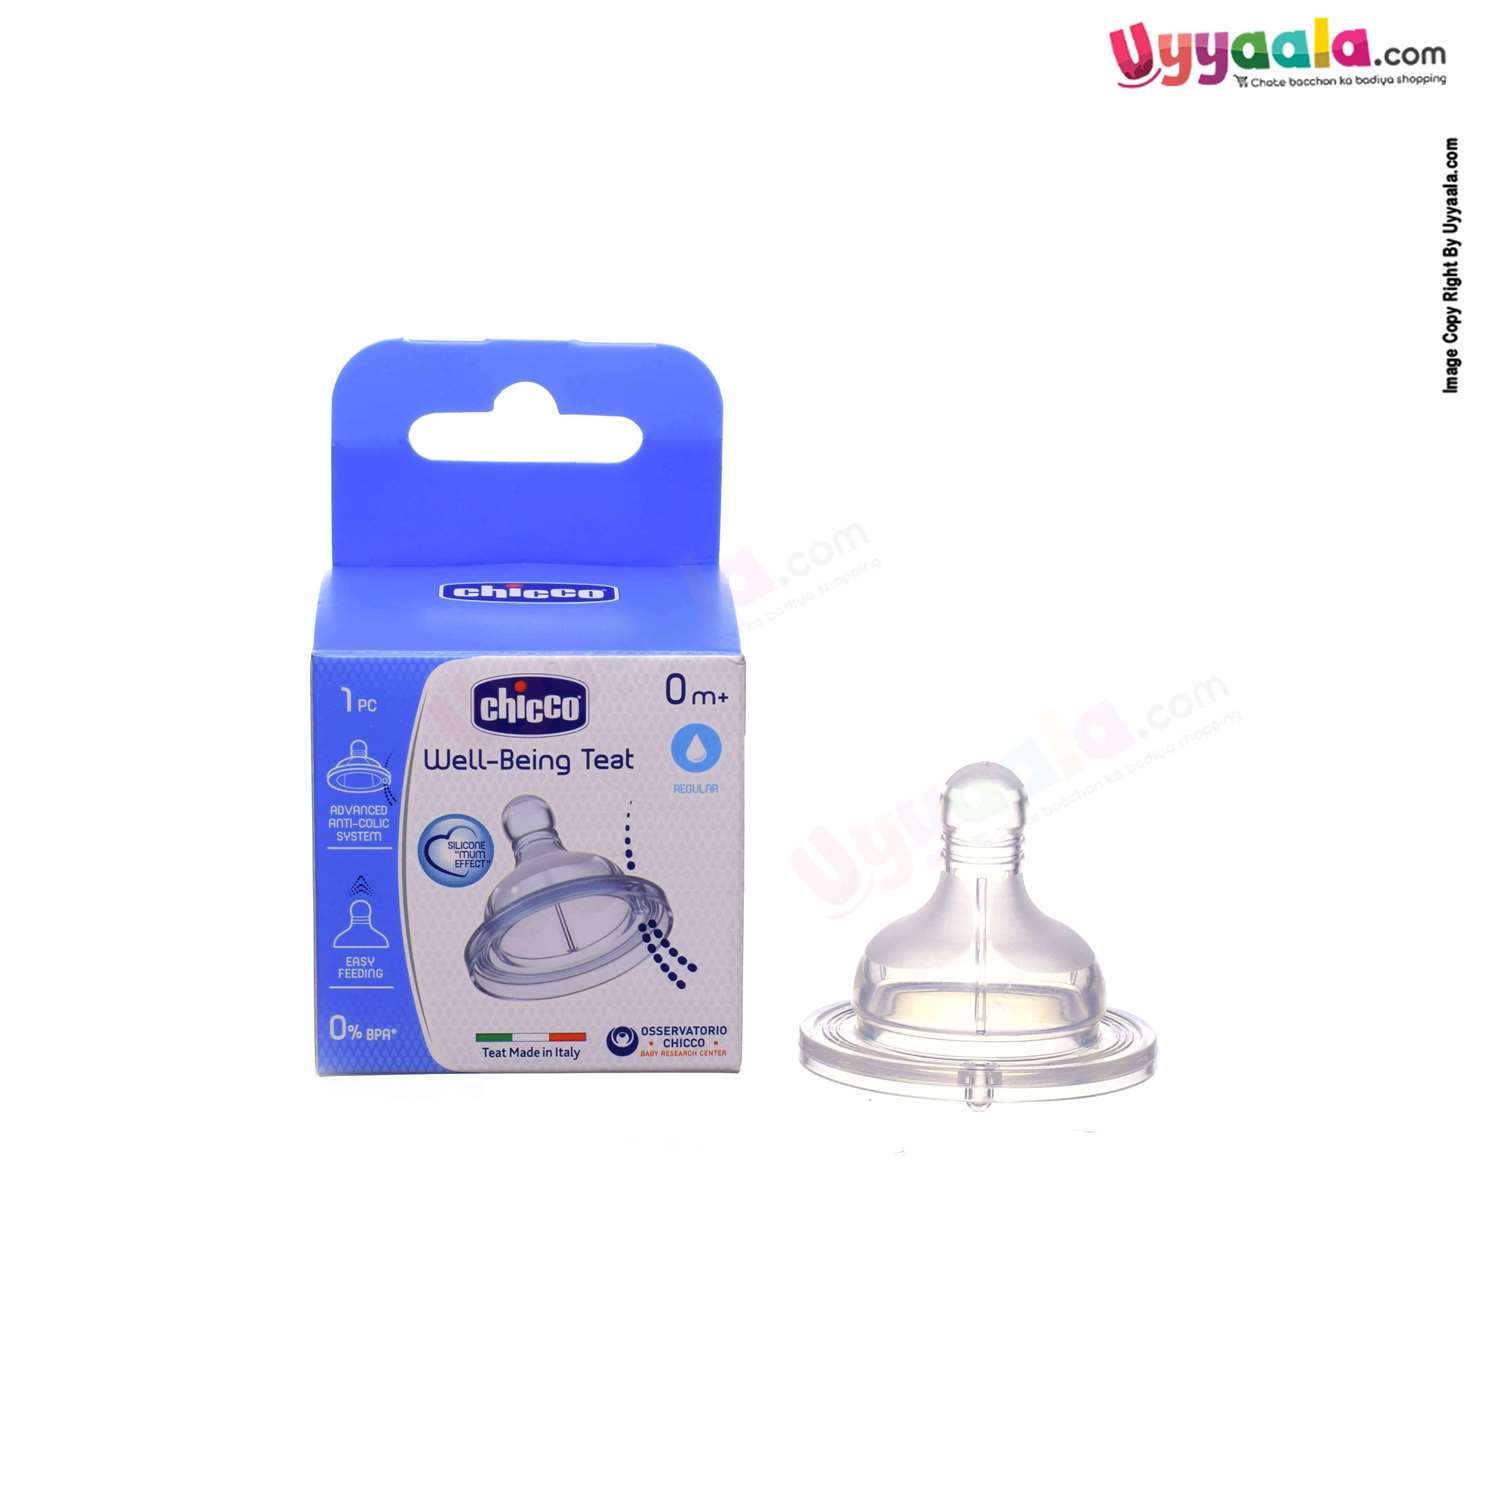 CHICCO Regular flow well being silicon teat, 1pc - 0+m